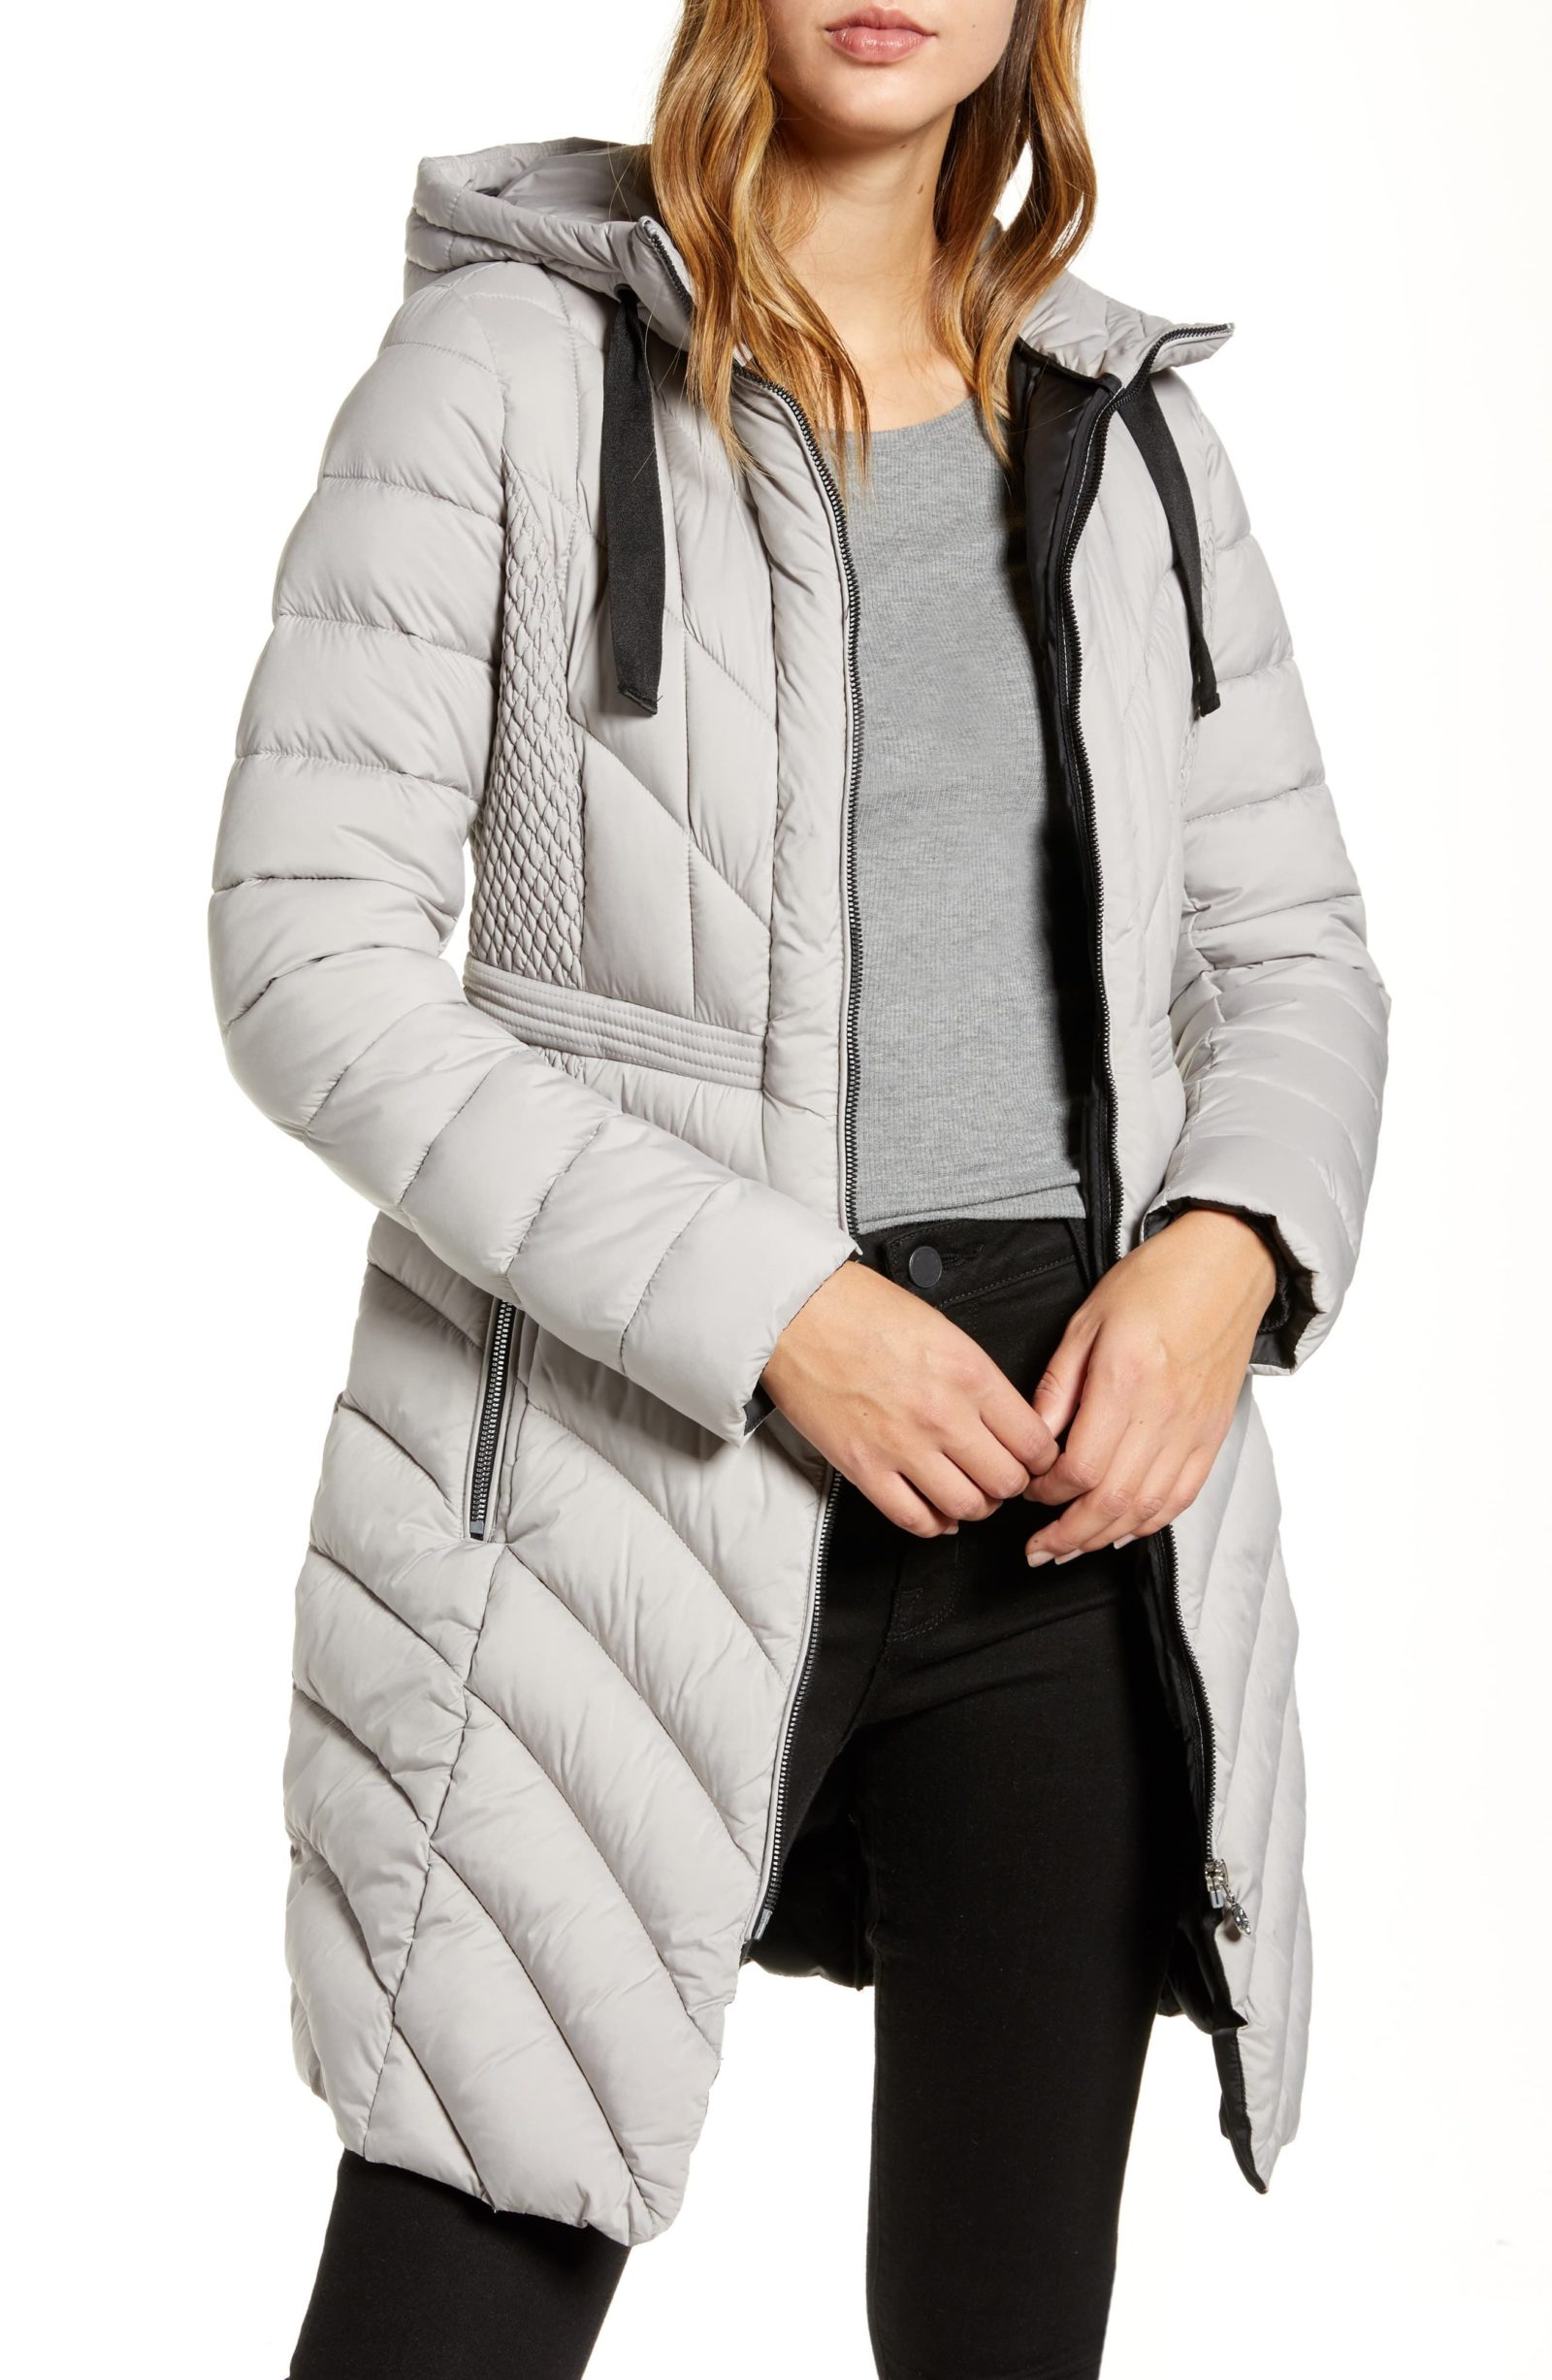 Fall Staple - 11 New Puffer Jackets From Nordstrom This Fall